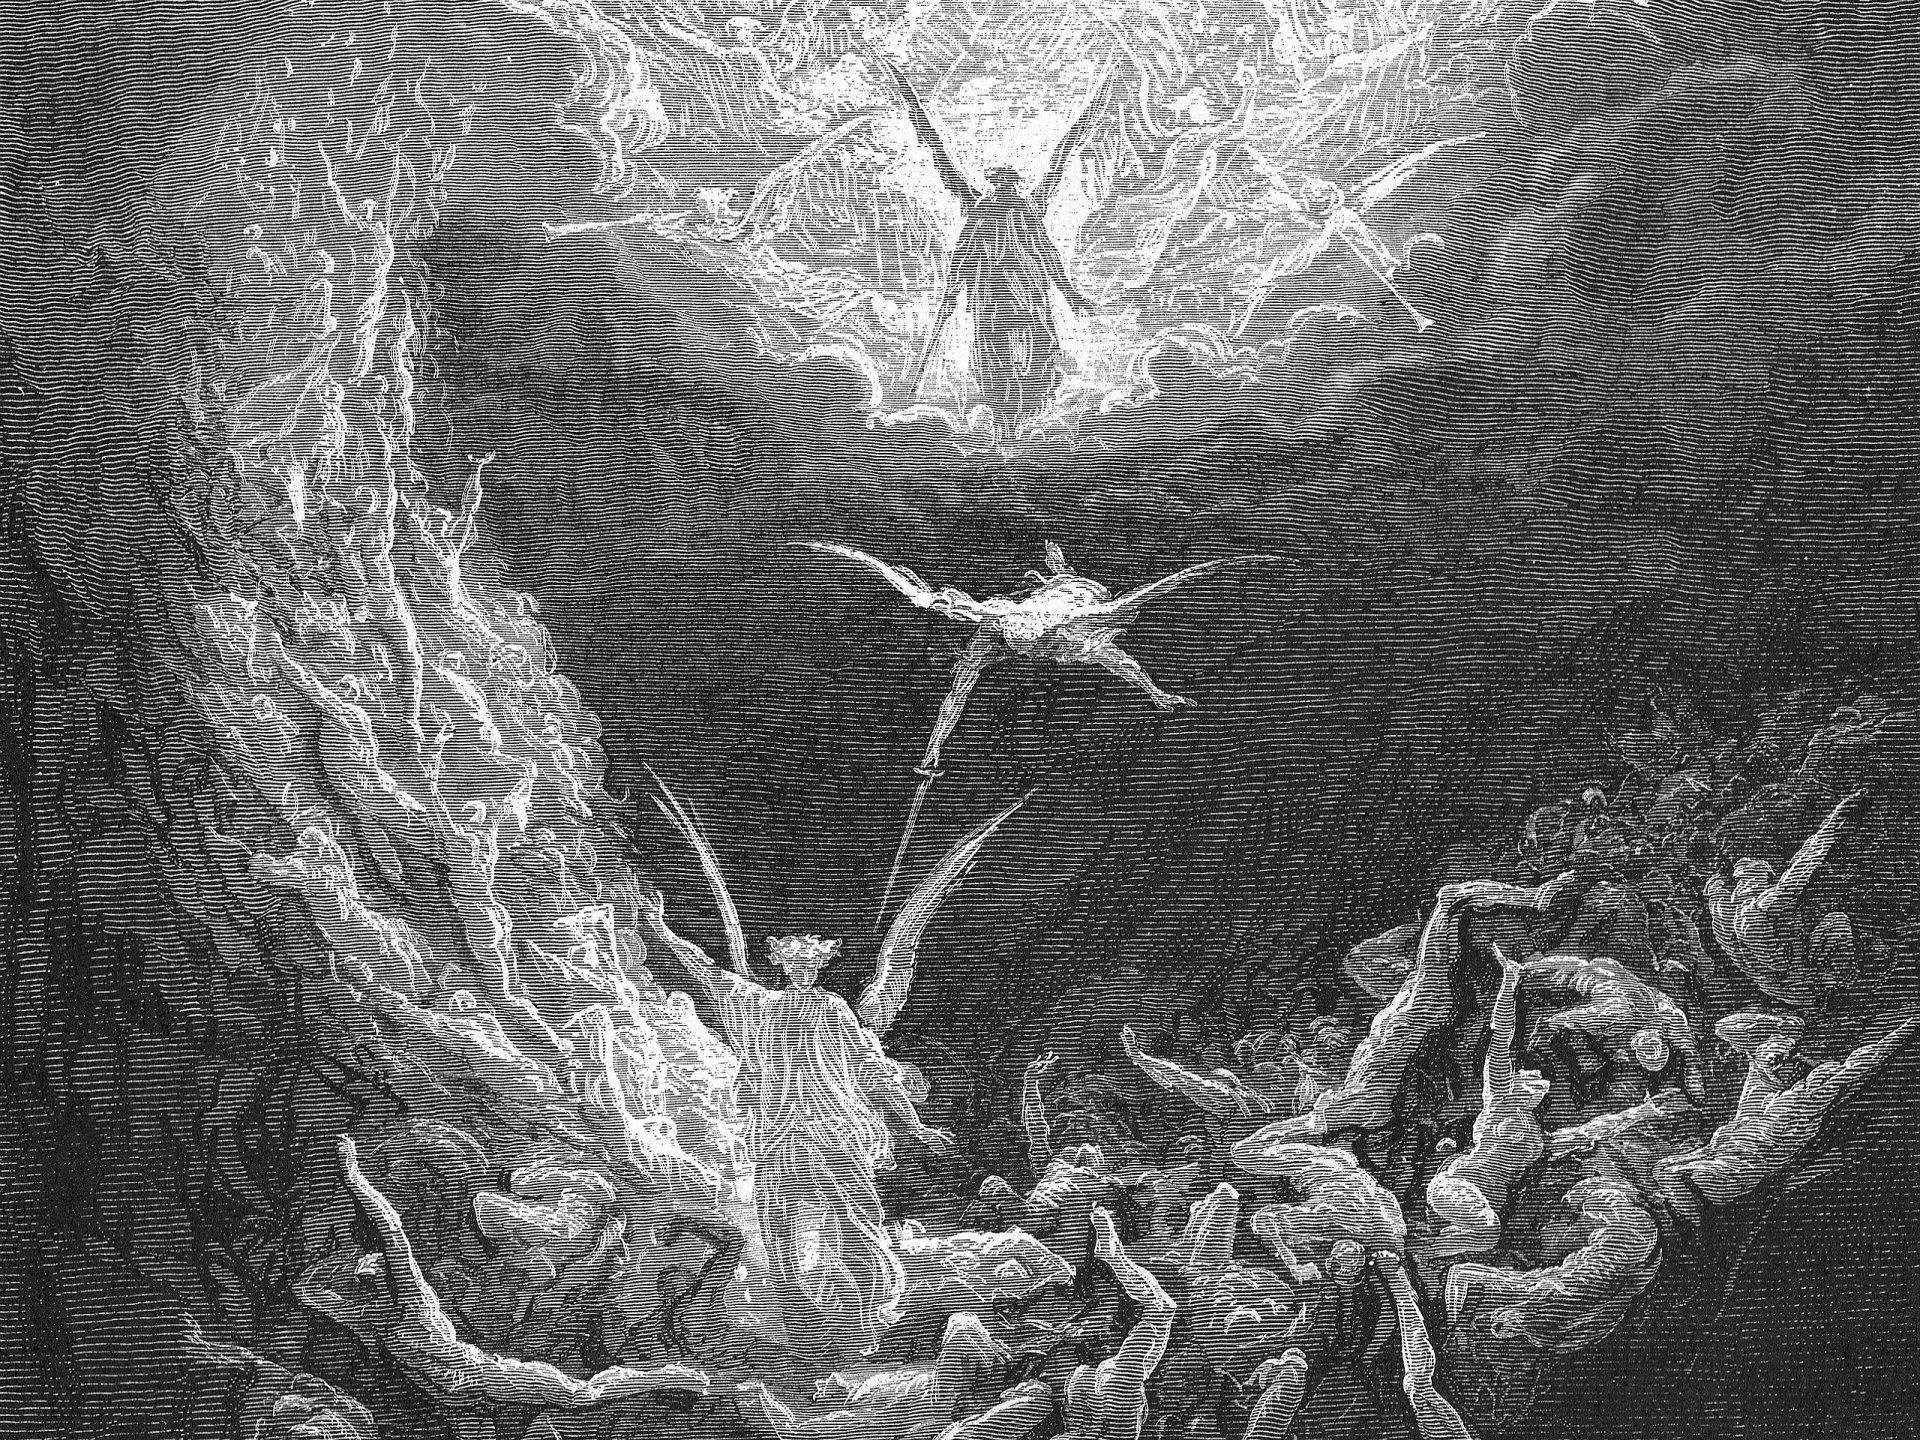 Gustave Doré Wallpapers - Top Free Gustave Doré Backgrounds ...